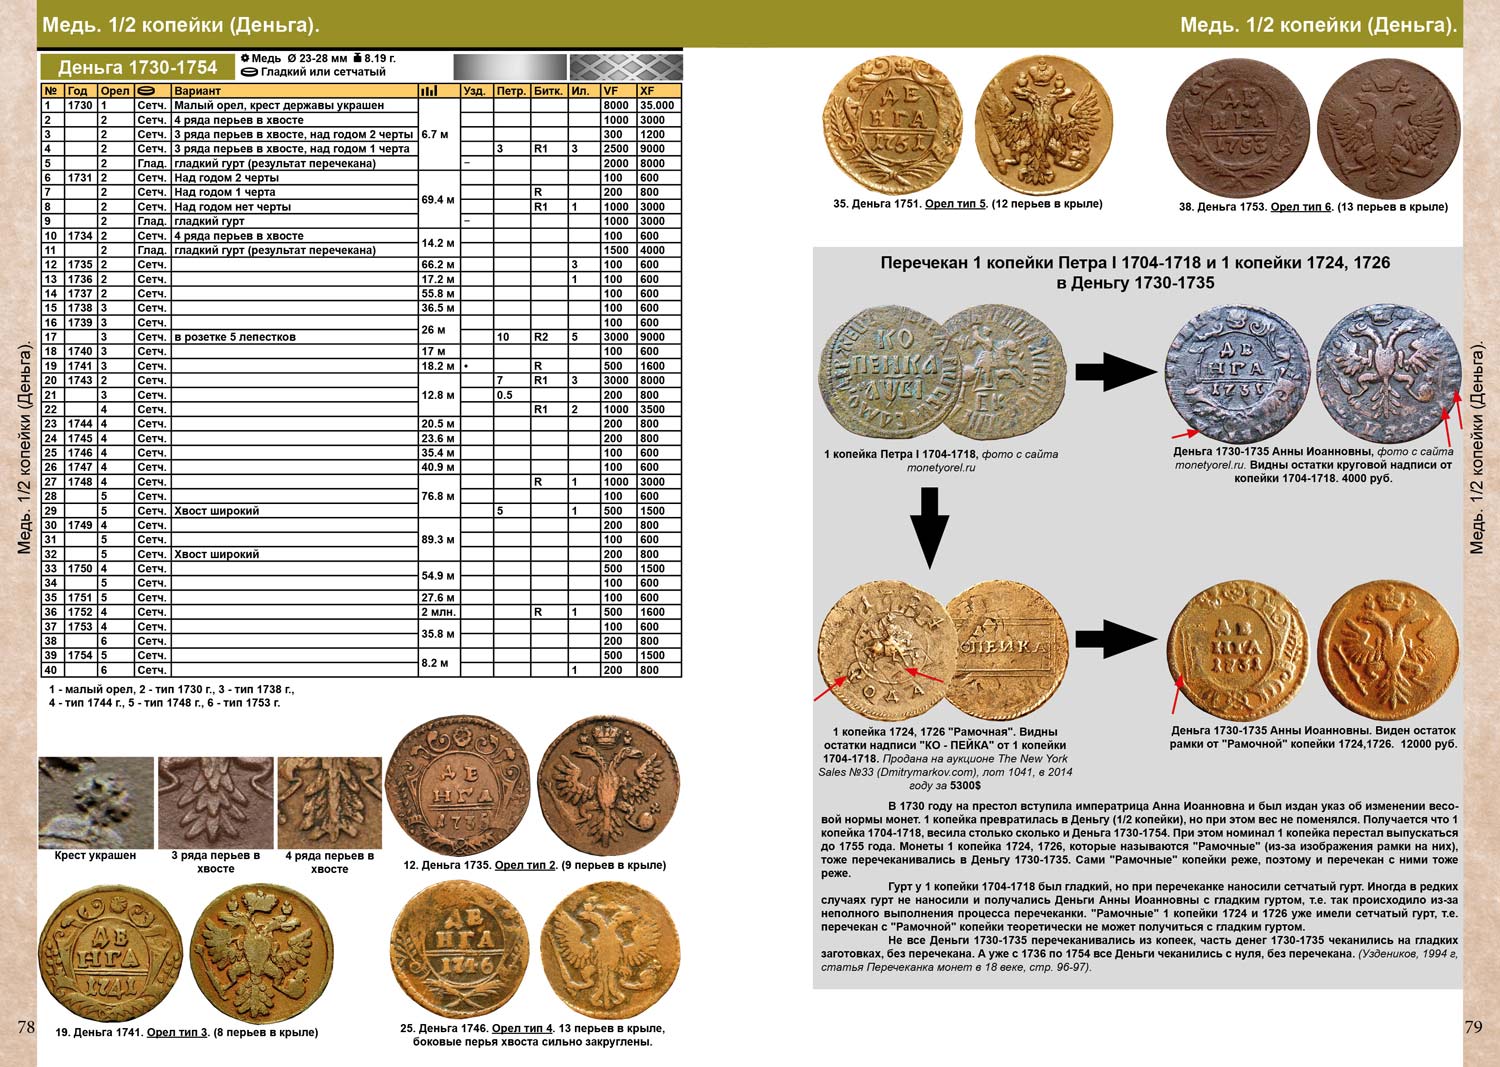 Catalog of Coins of Imperial Russia 1682-1917 prices in dollars in English. 